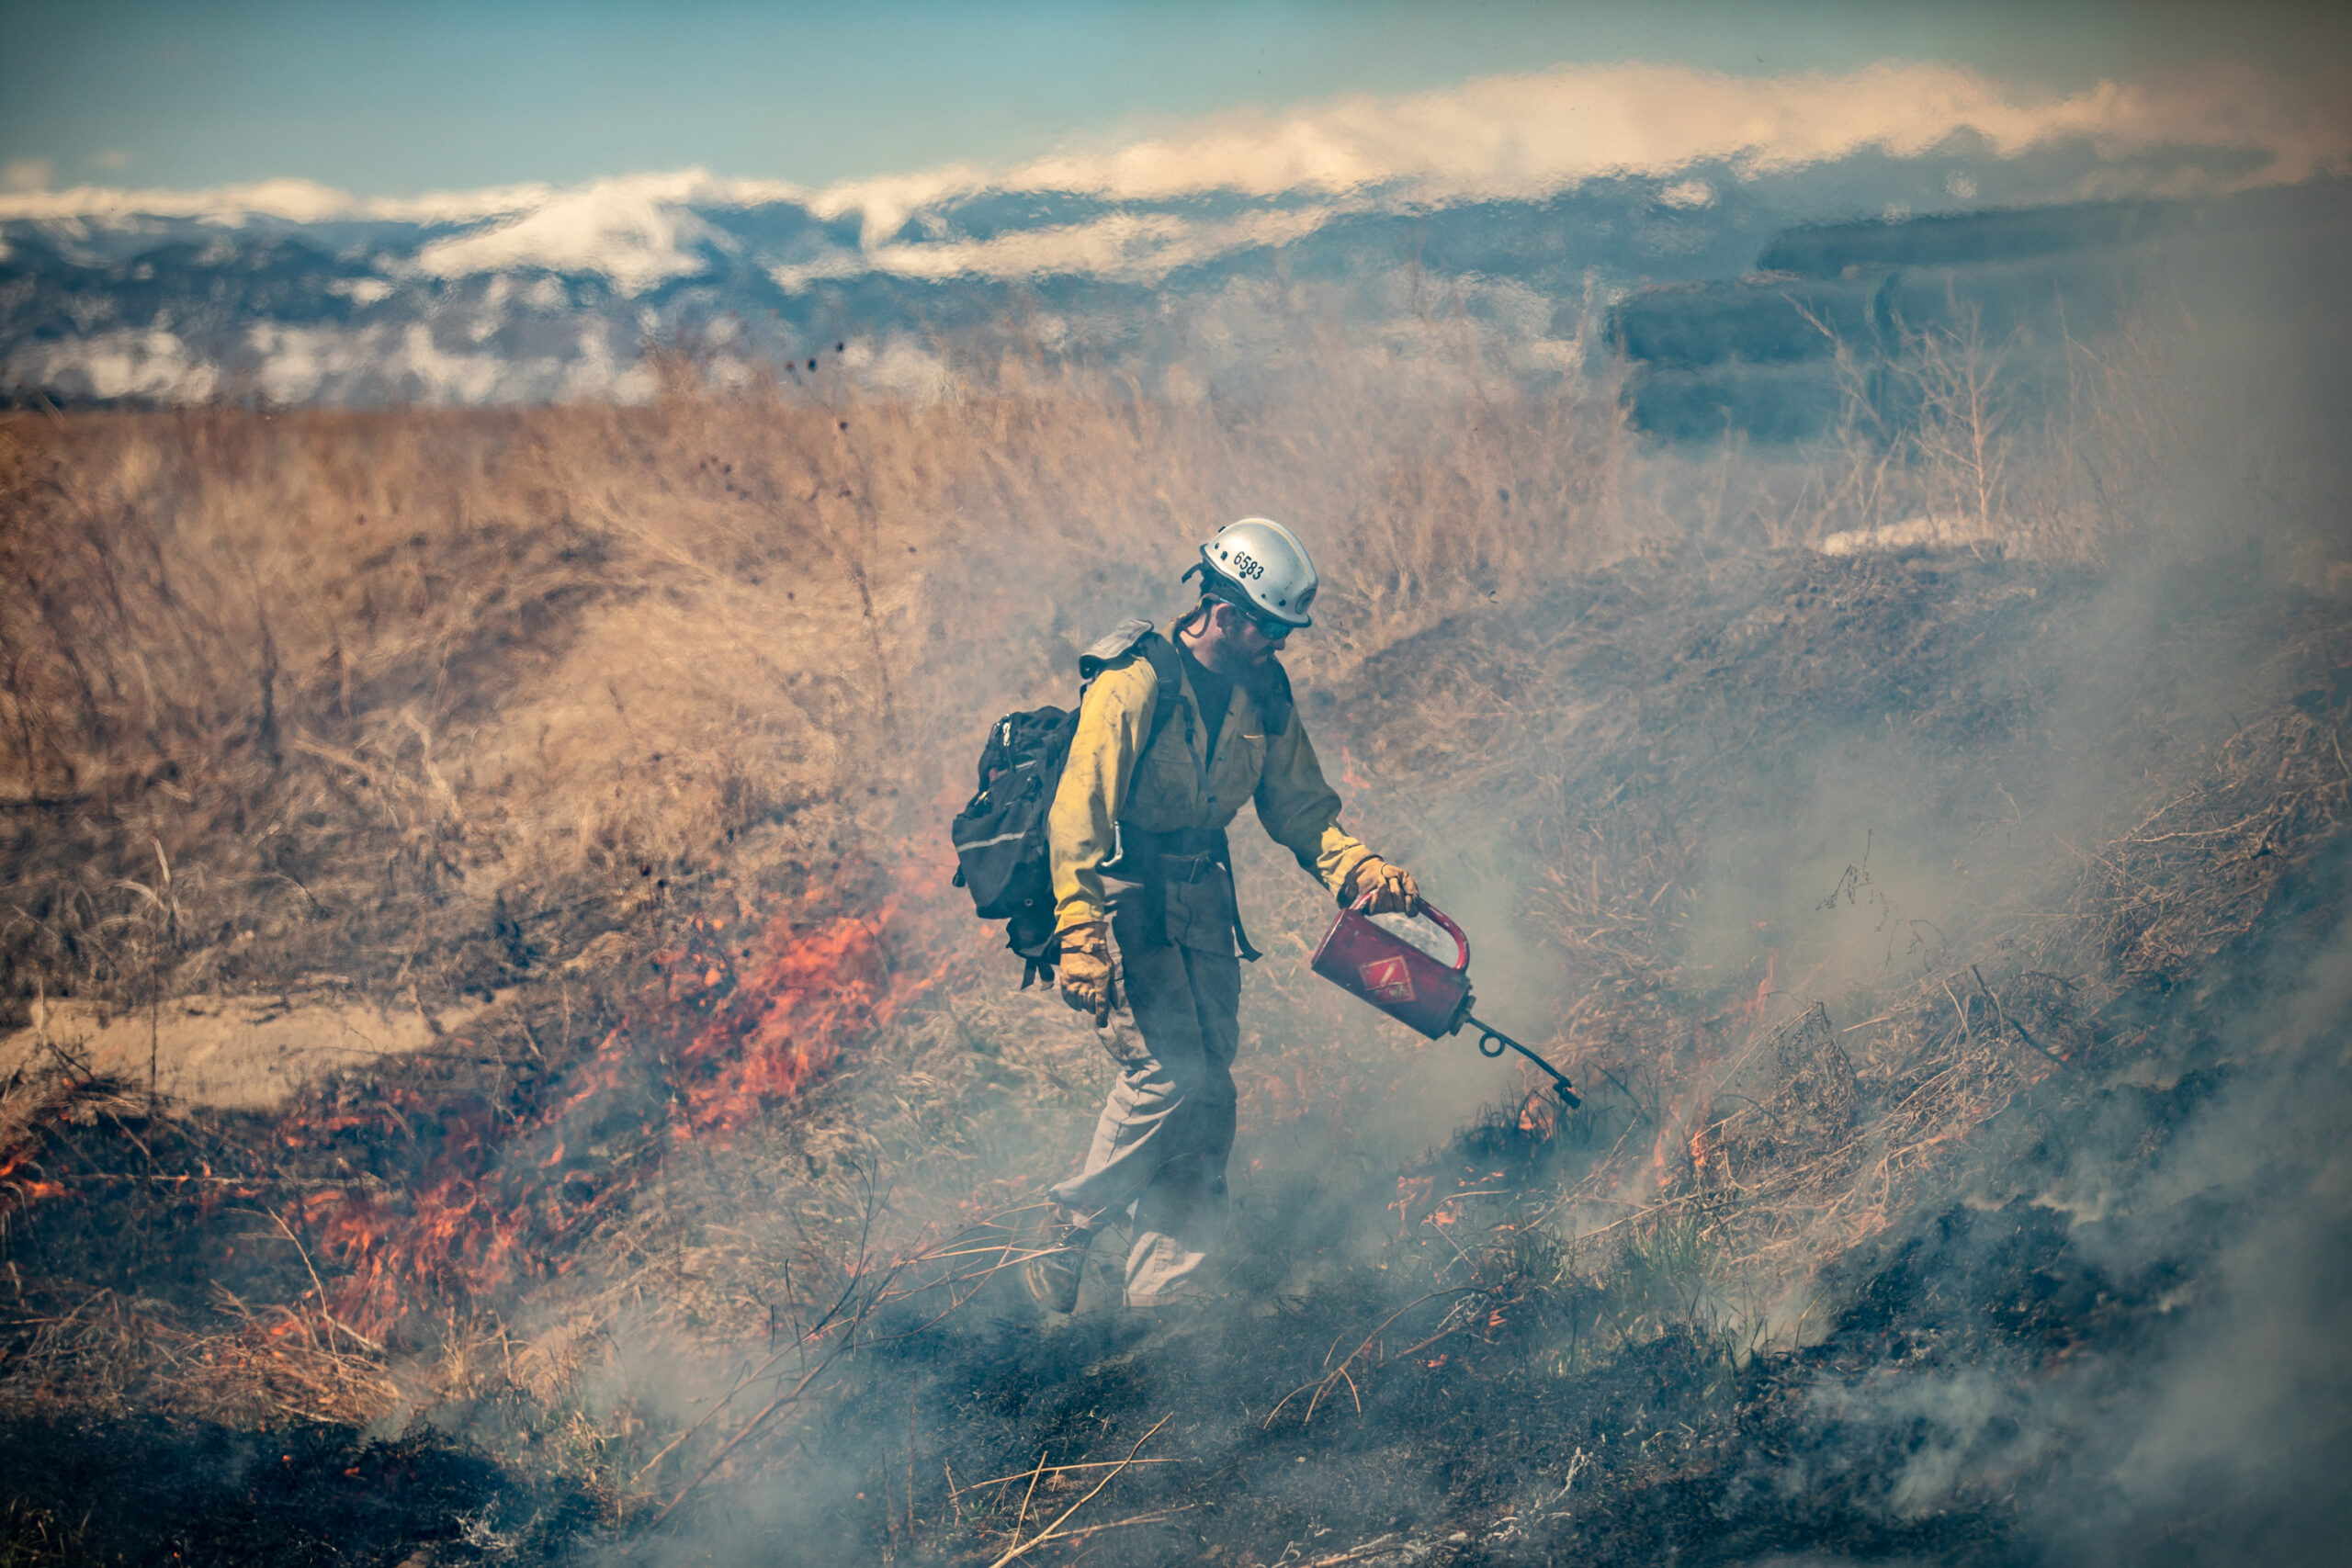 Controlled burns help prevent wildfires. Regulations make them nearly impossible.